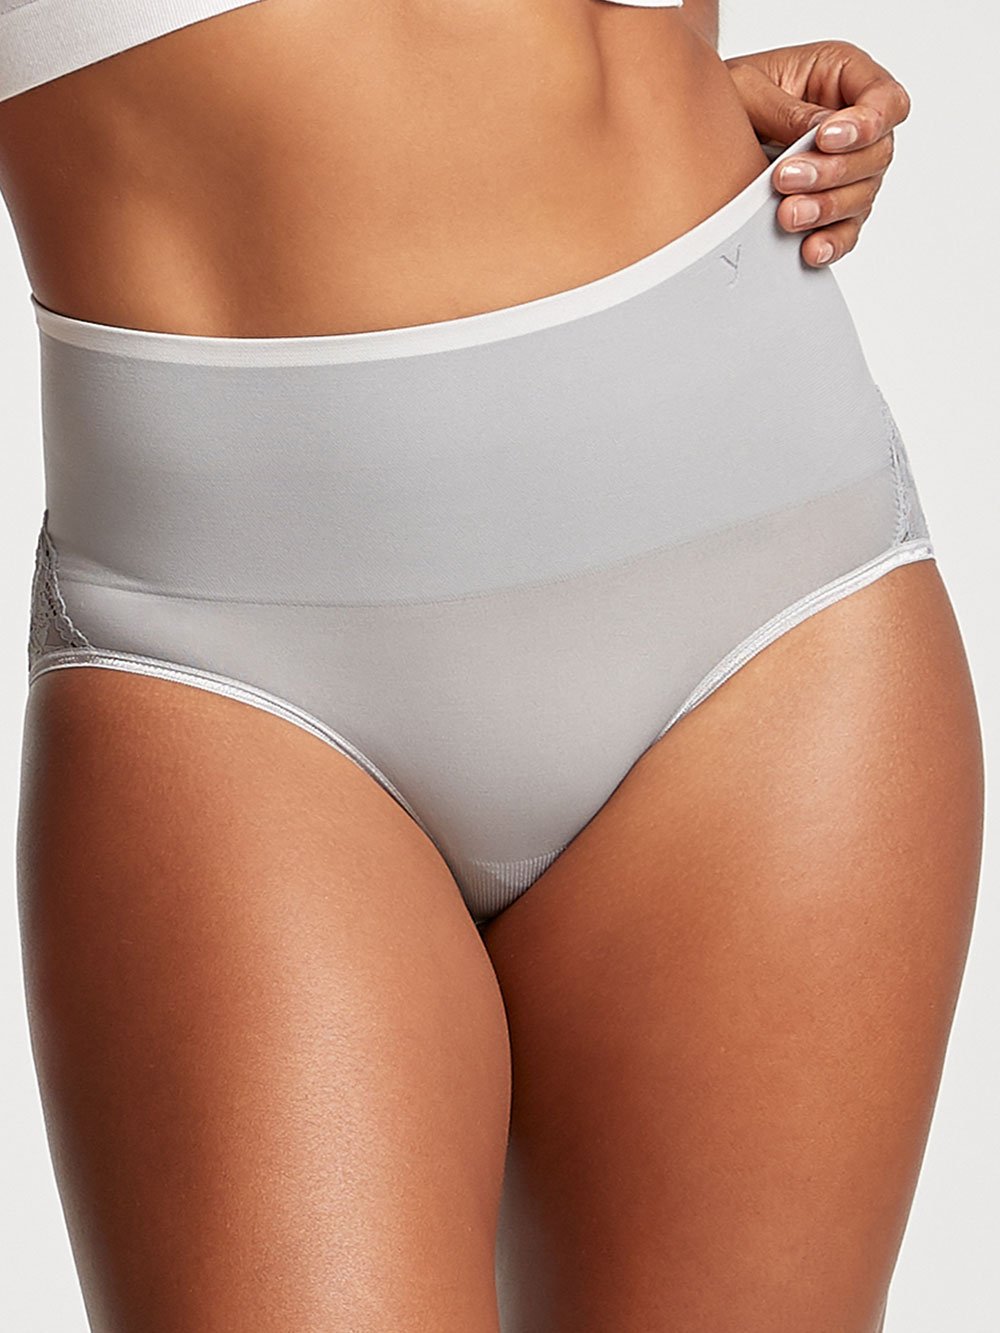 Yummie Tummie Seamless Shaping Smoothing Panty Underwear